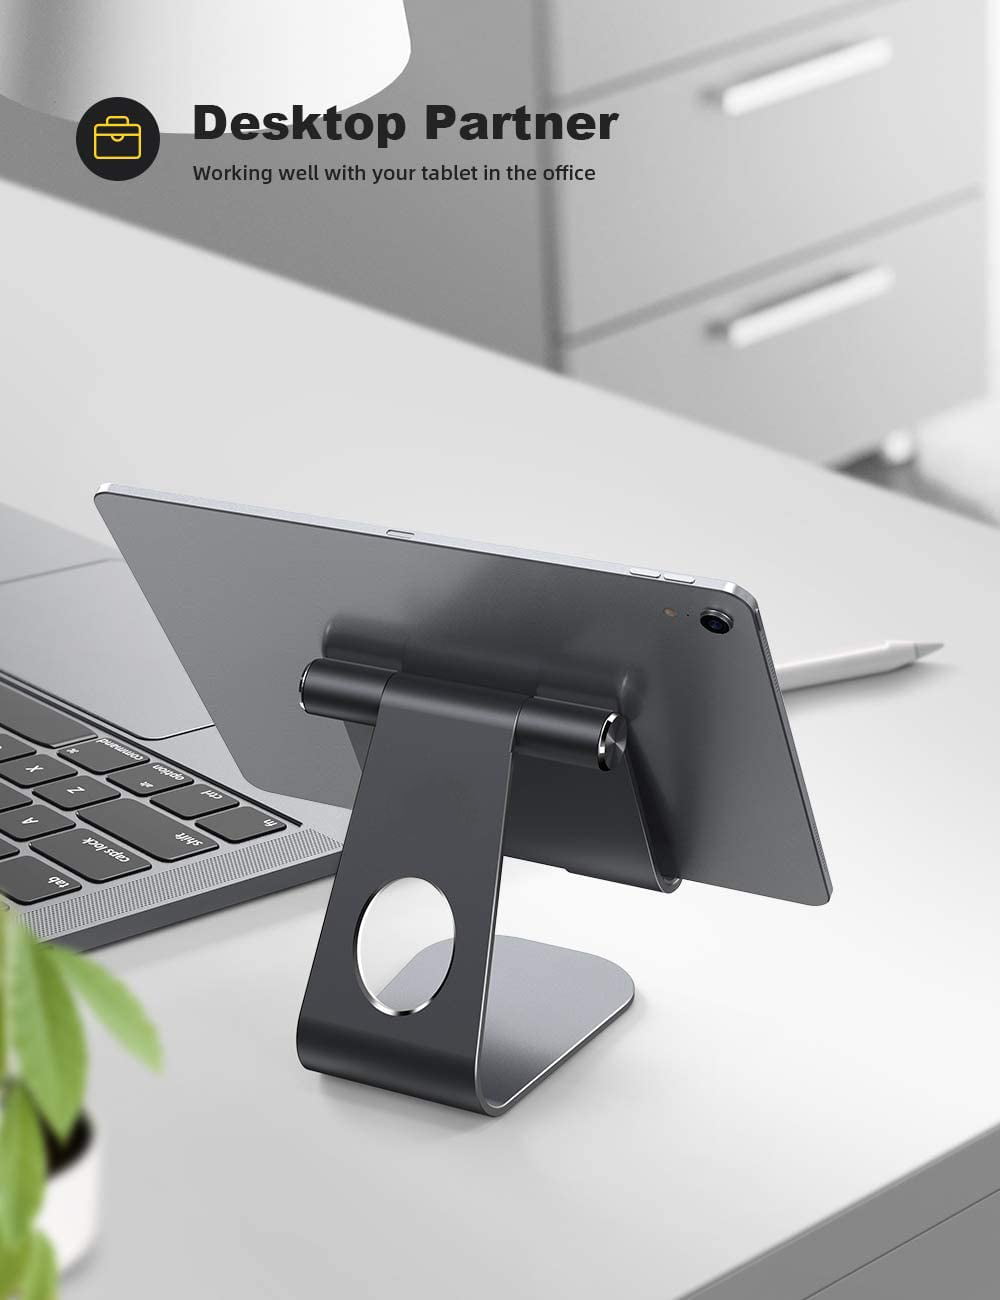 Adjustable Desktop Stand for iPad Pro 10.5” In Las Vegas - Rent For Event